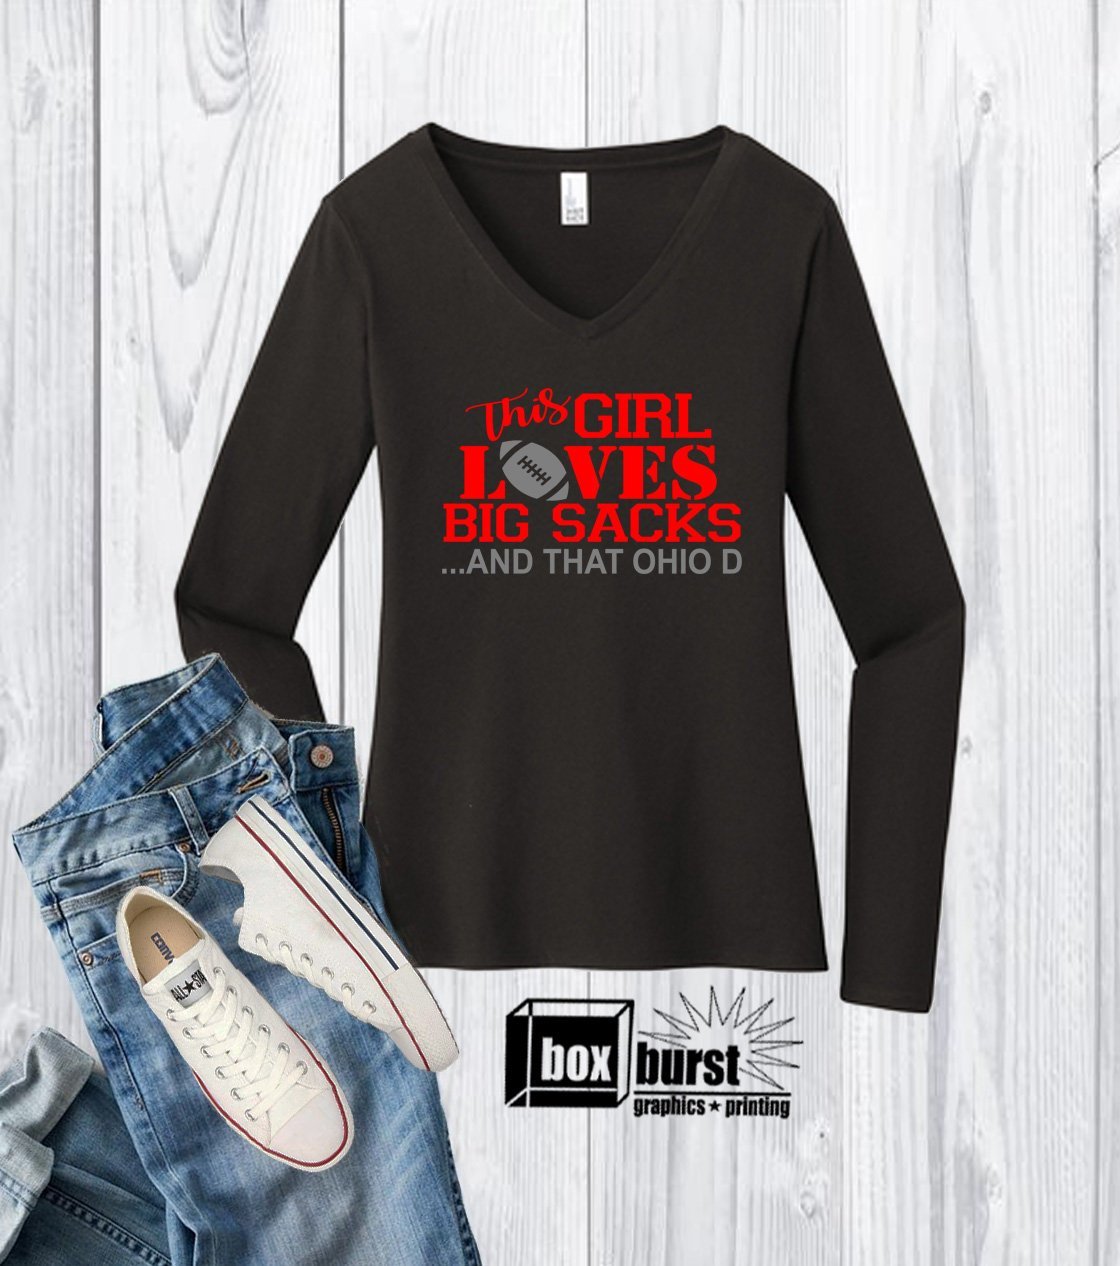 Long Sleeve, Fitting, Ohio state shirt this girl loves big sacks and that ohio D funny women's shirt